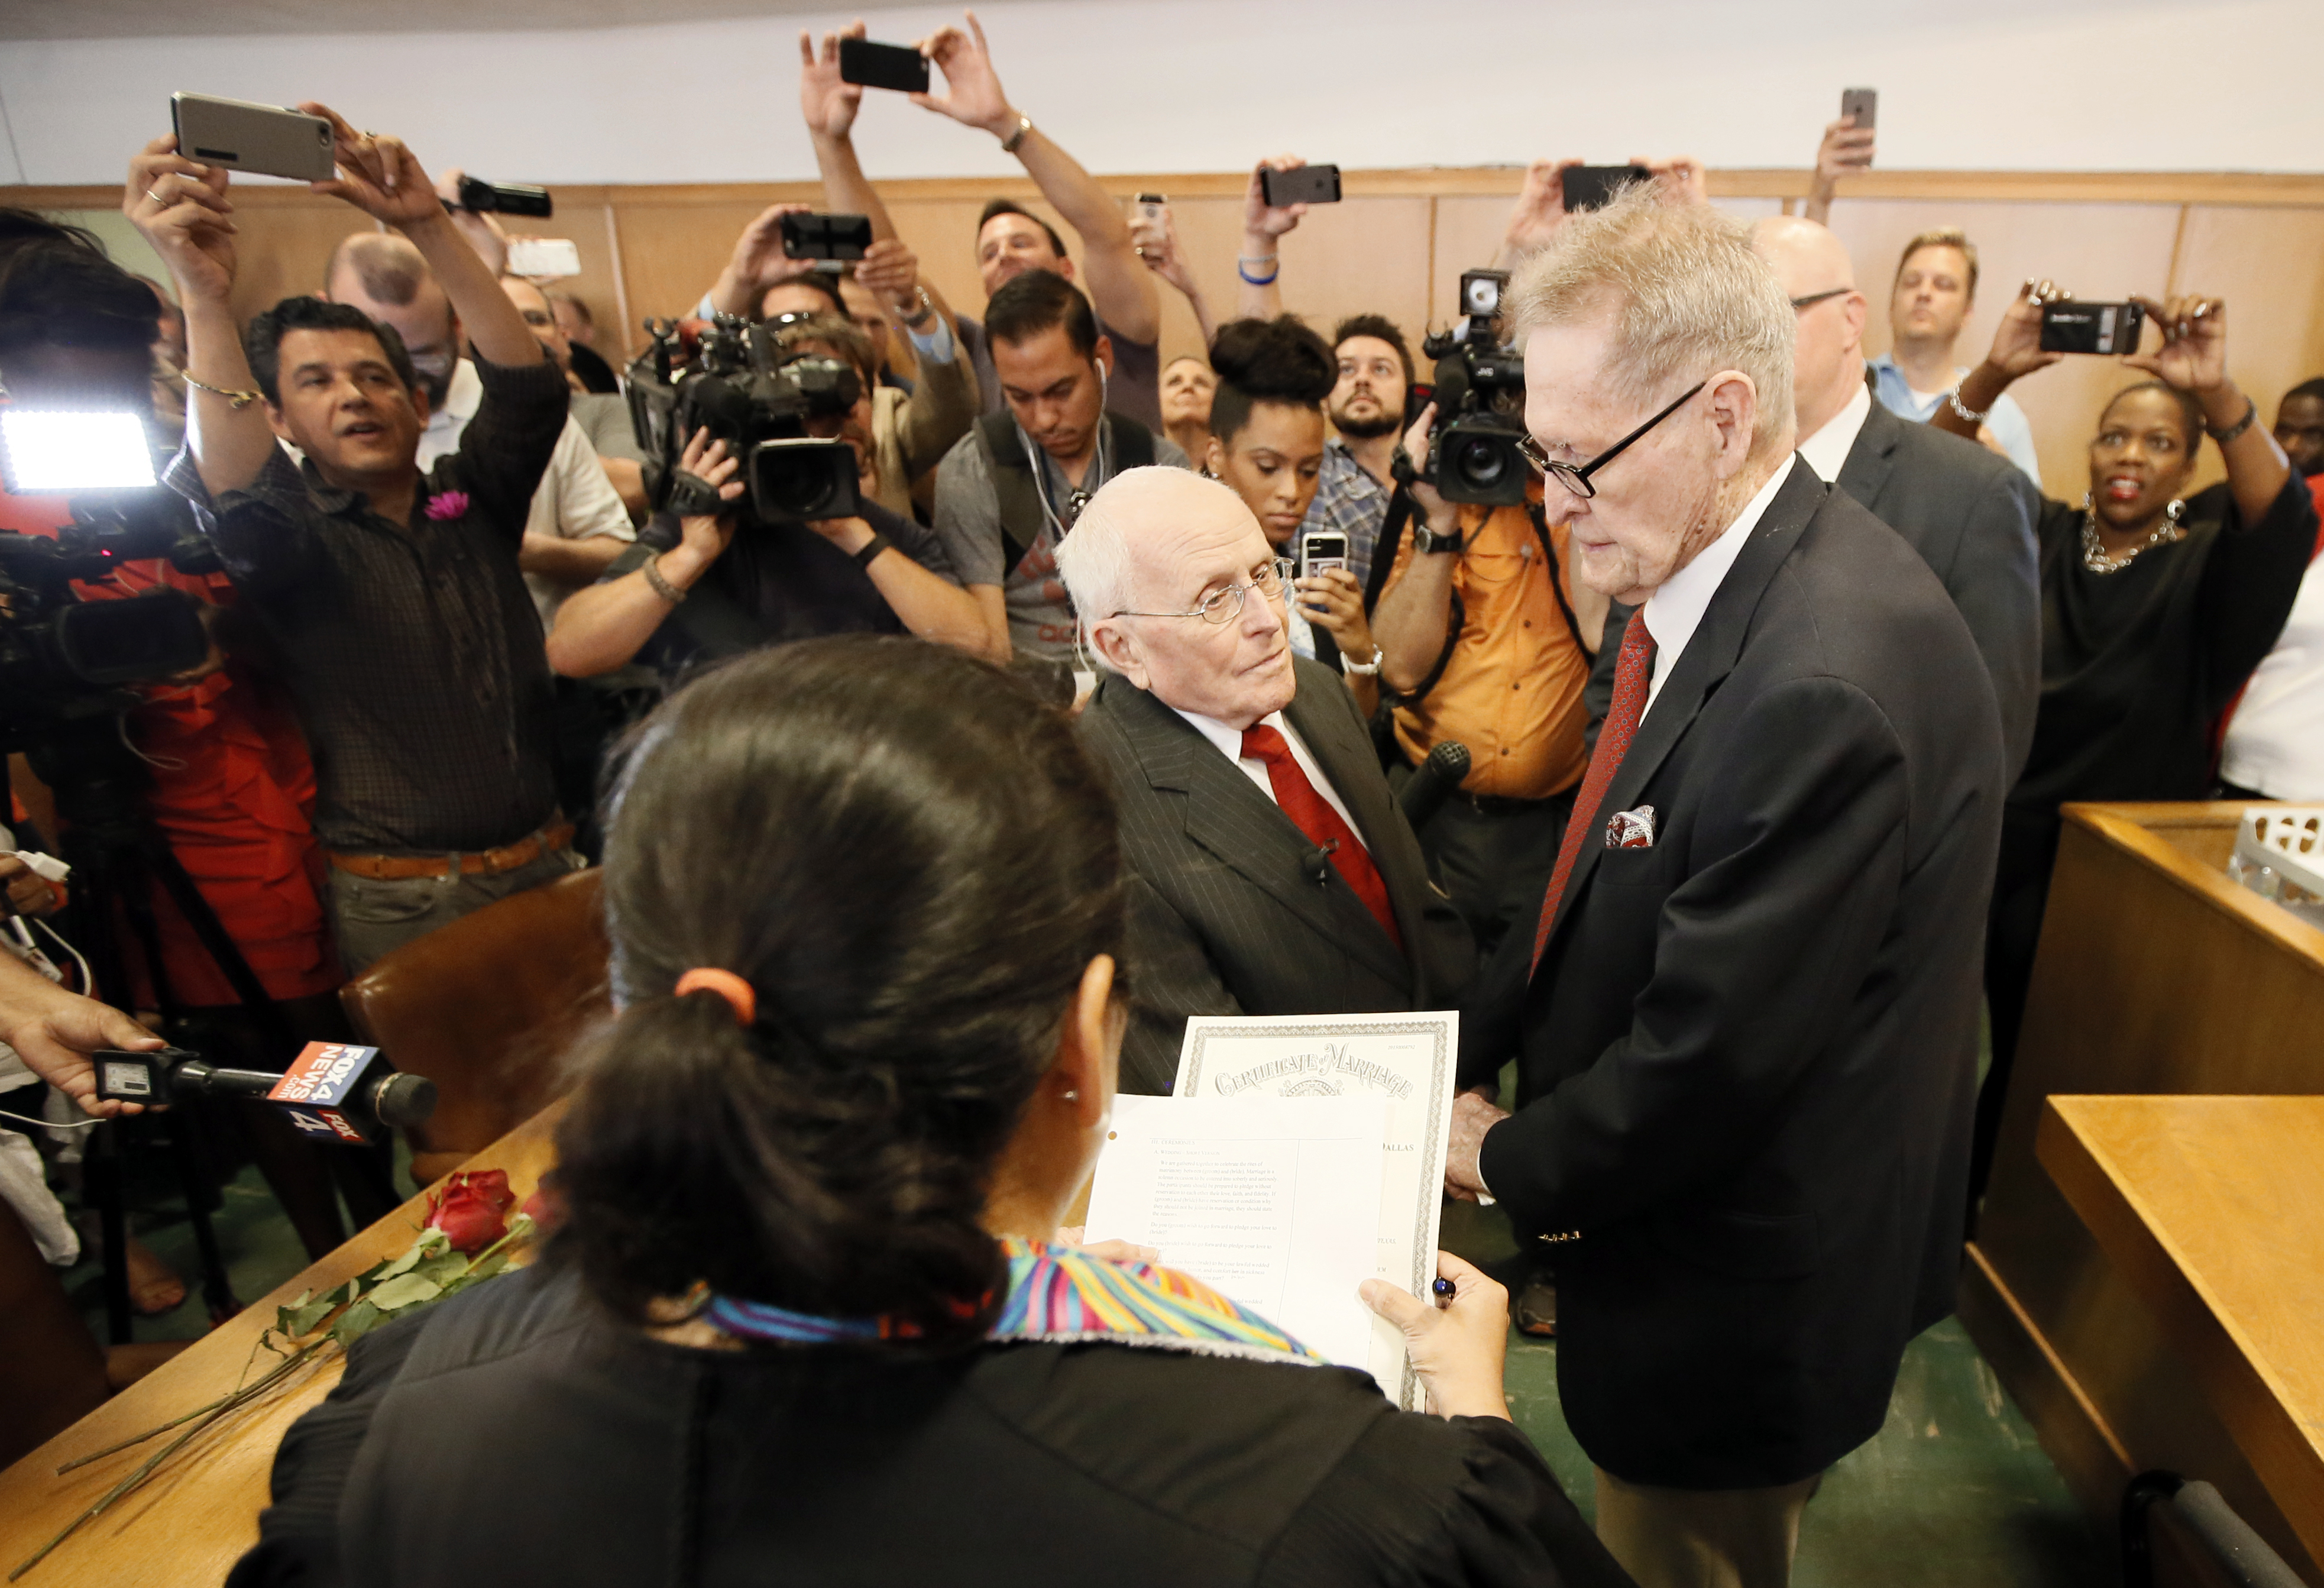 Judge Dennise Garcia, front, conducts a marriage ceremony for George Harris, center left, 82, and Jack Evans, 85, center right, Friday, June 26, 2015, in Dallas. Gay and lesbian Americans have the same right to marry as any other couples, the Supreme Court declared Friday in a historic ruling deciding one of the nation's most contentious and emotional legal questions. Celebrations and joyful weddings quickly followed in states where they had been forbidden. (AP Photo/Tony Gutierrez)